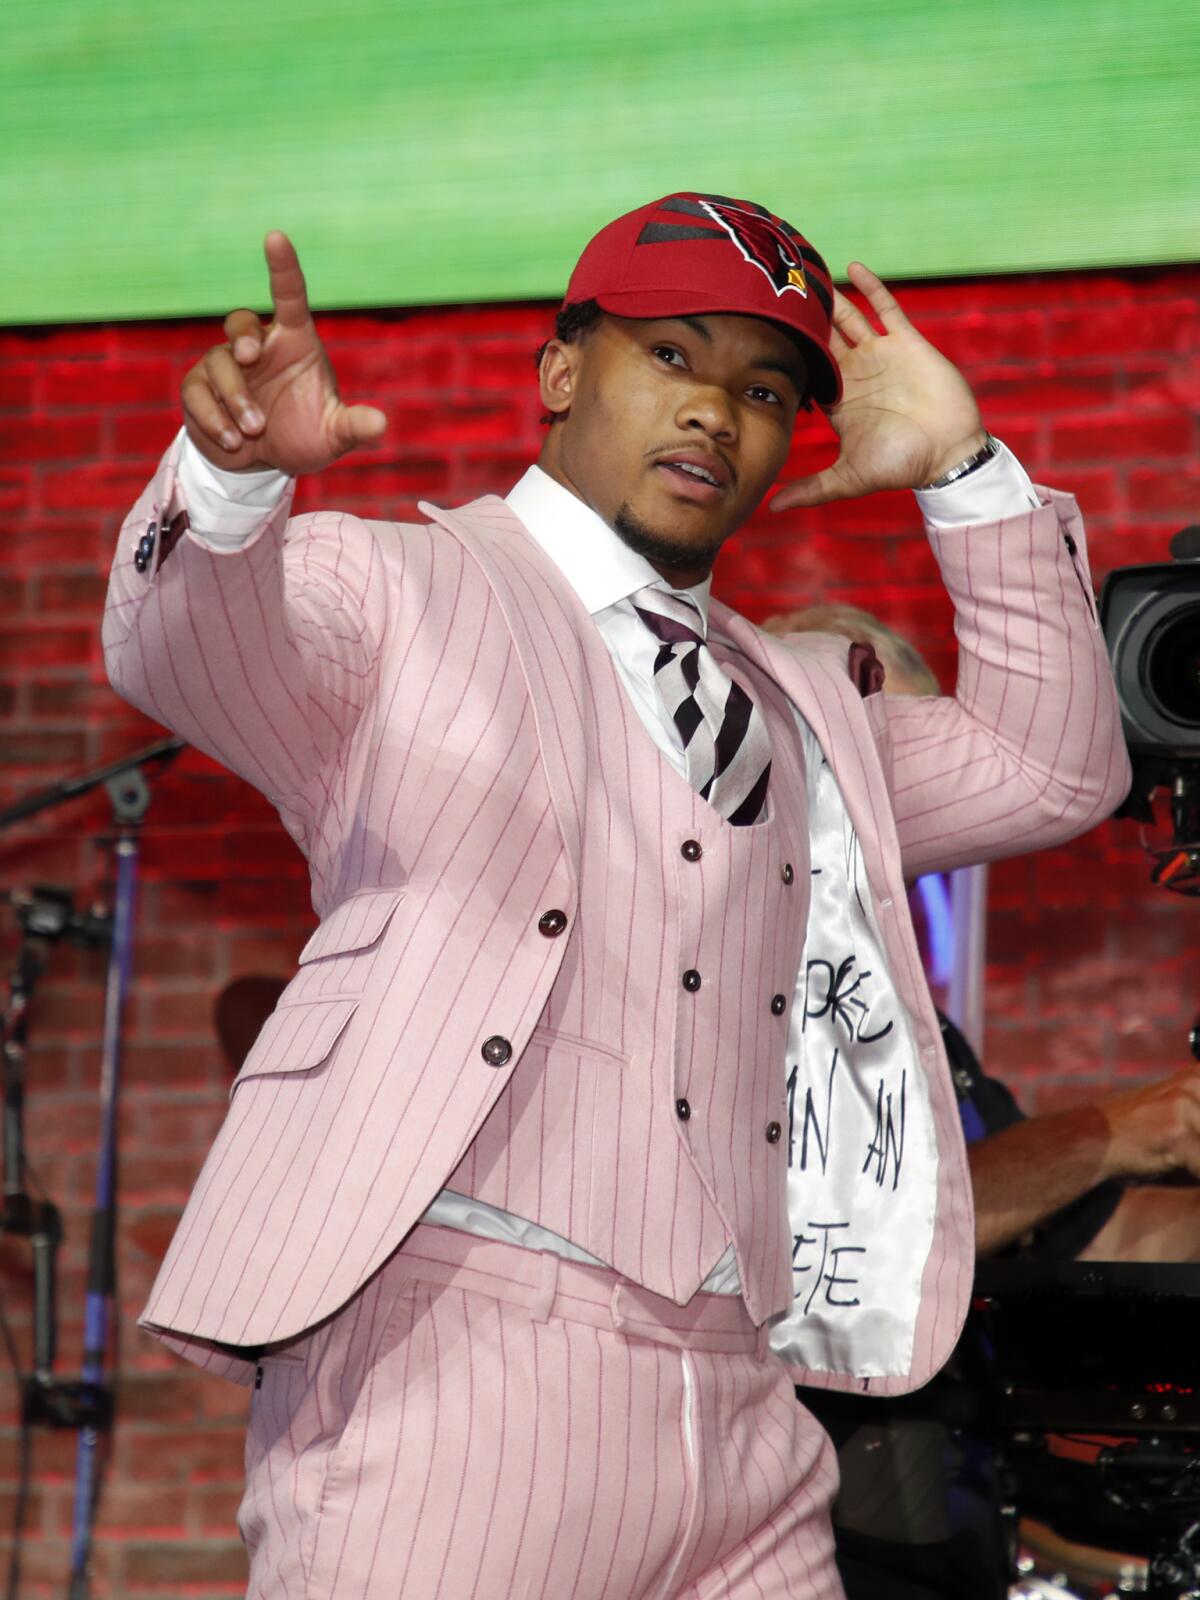 Oklahoma quarterback Kyler Murray enters the main stage after the Arizona Cardinals selected him in the first round of the NFL Draft on Thursday.